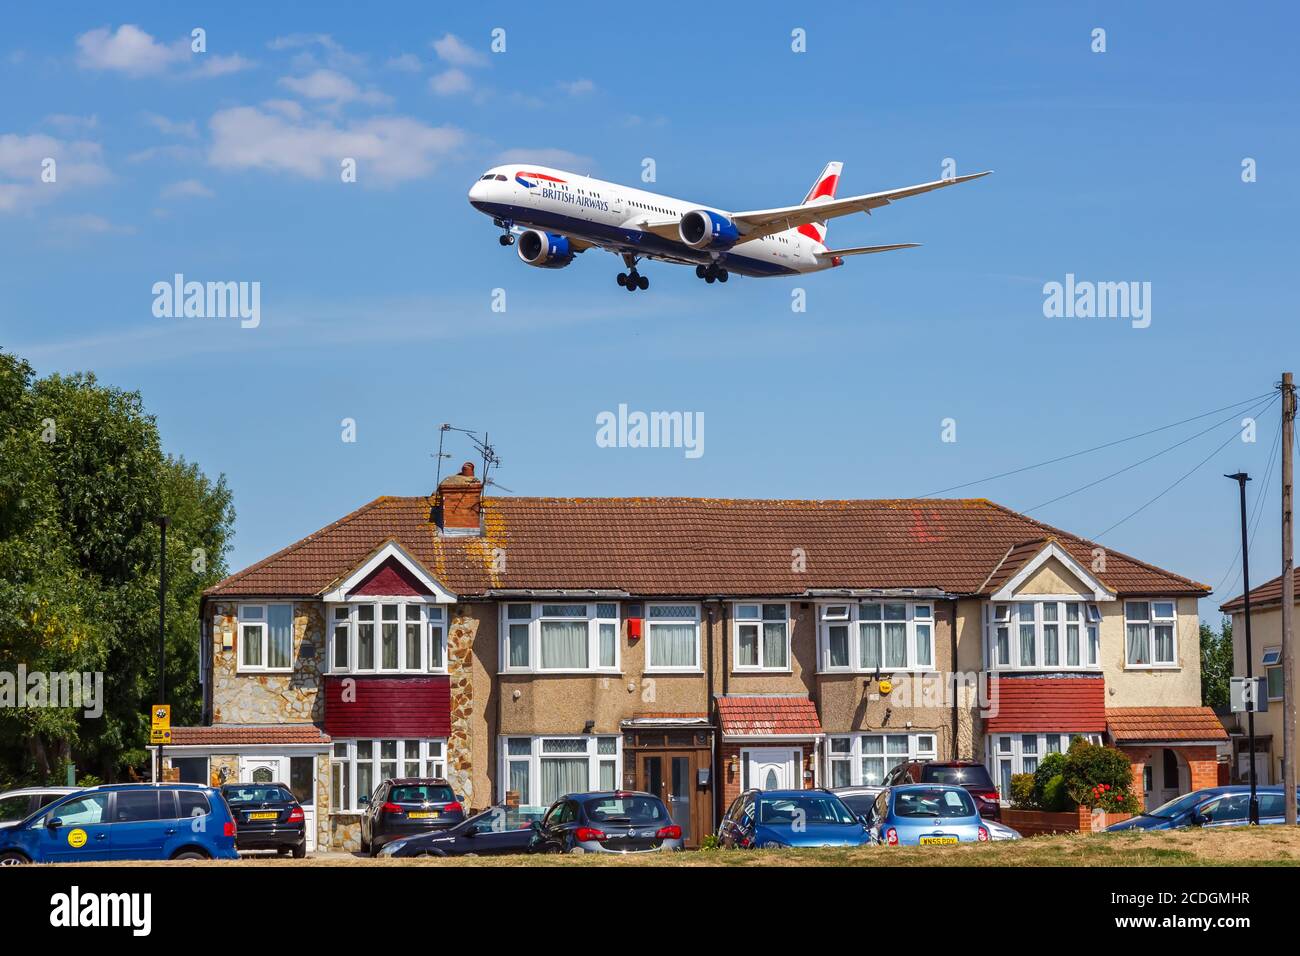 London, United Kingdom - August 1, 2018: British Airways Boeing 787-9 Dreamliner airplane aircraft noise at London Heathrow Airport (LHR) in the Unite Stock Photo